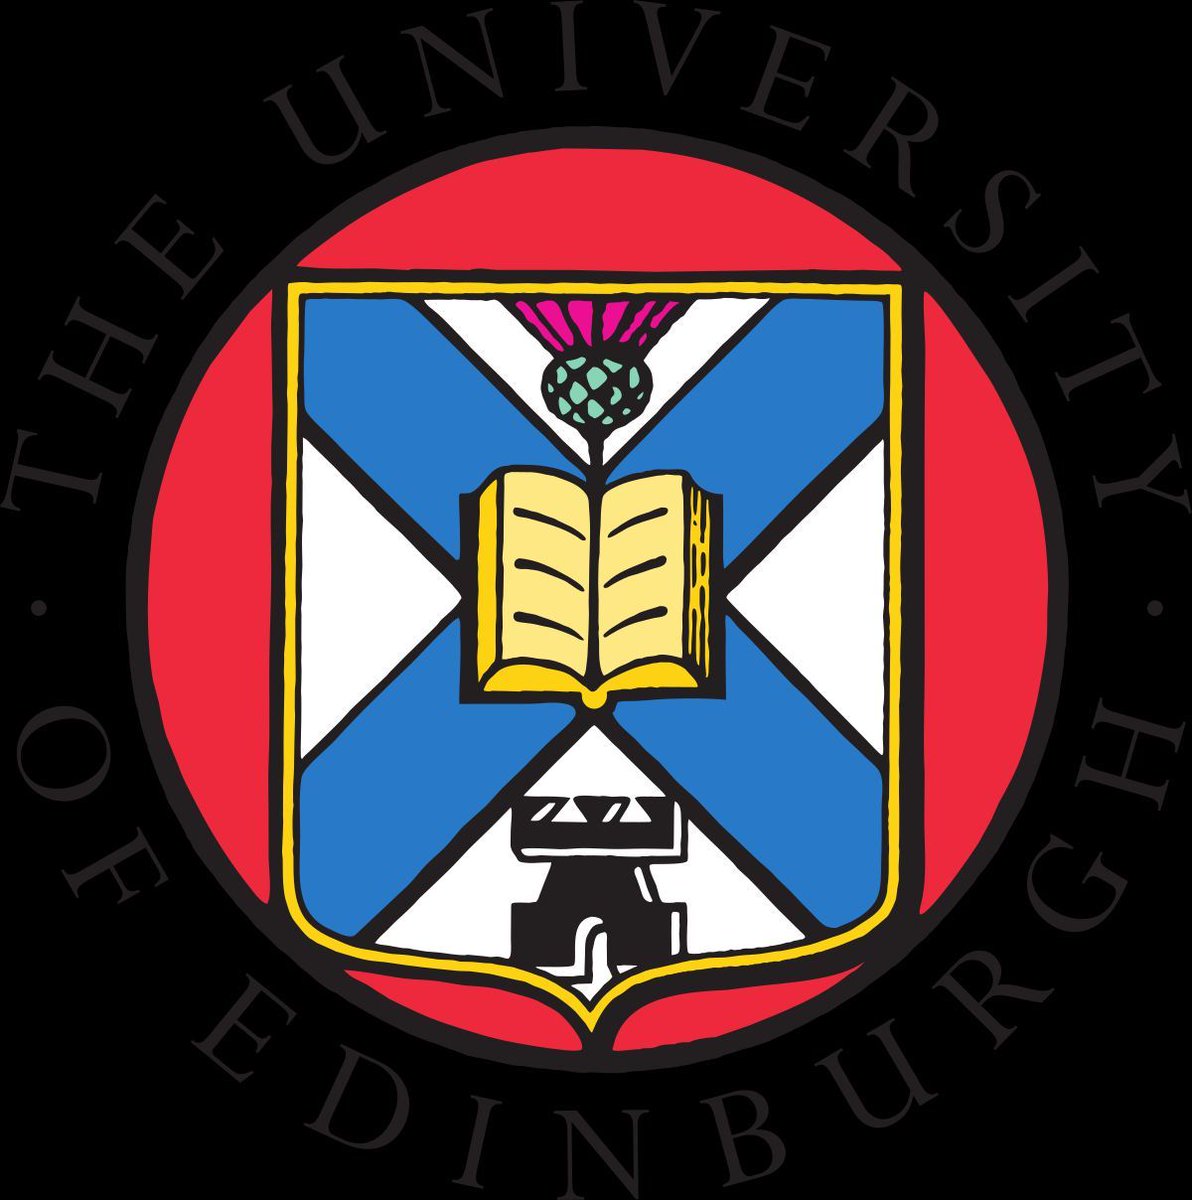 Applications are open for a PhD Studentship in 'Pasts, Presents and Futures of Digitally-Mediated Theatre' at @EdinburghUni @ahrcpress @sgsah & @traversetheatre buff.ly/3TwsXnU (deadline - 17 Apr 2024)